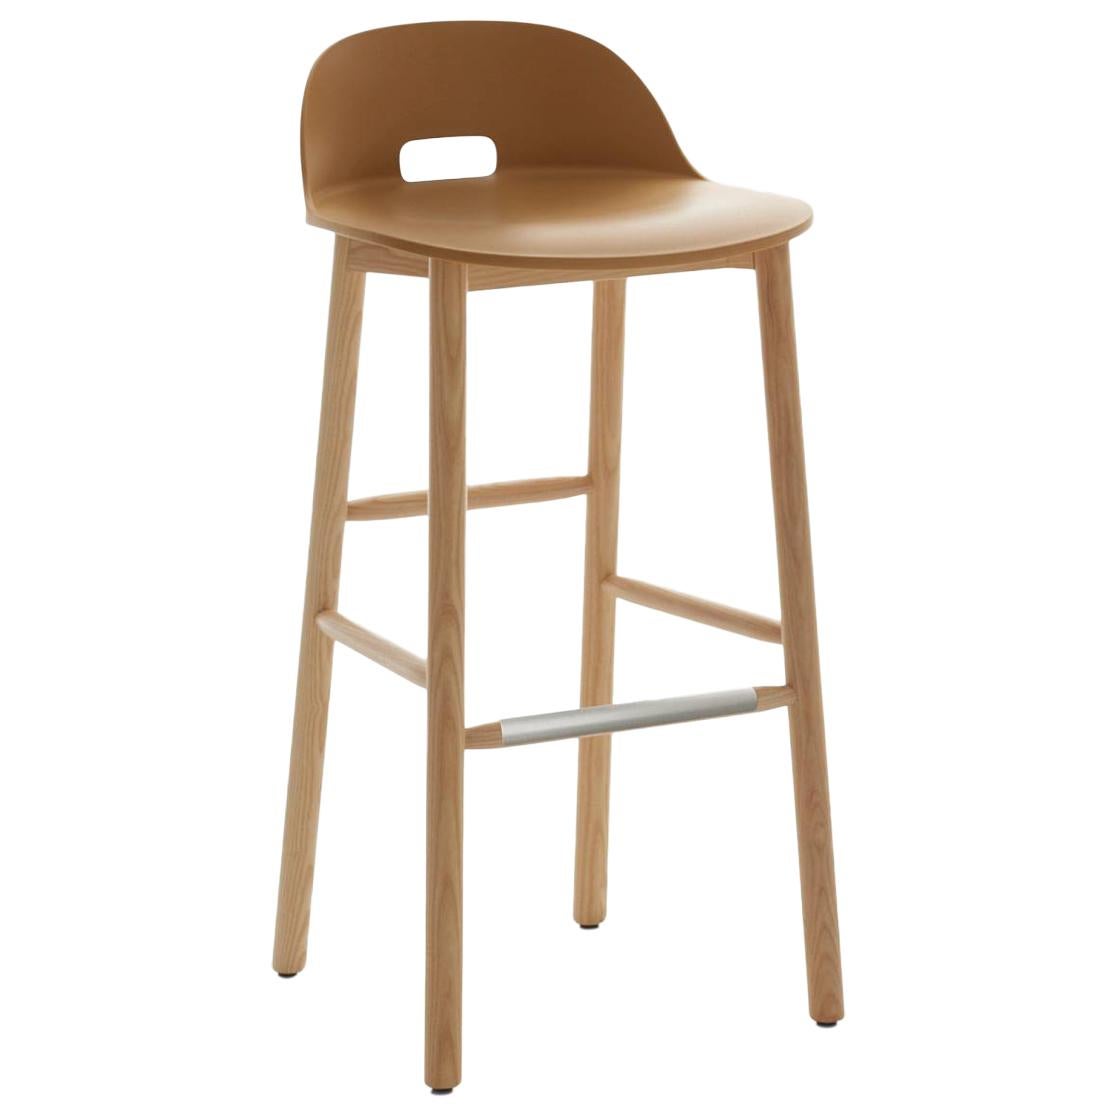 Emeco Alfi Barstool in Sand and Ash with Low Back by Jasper Morrison